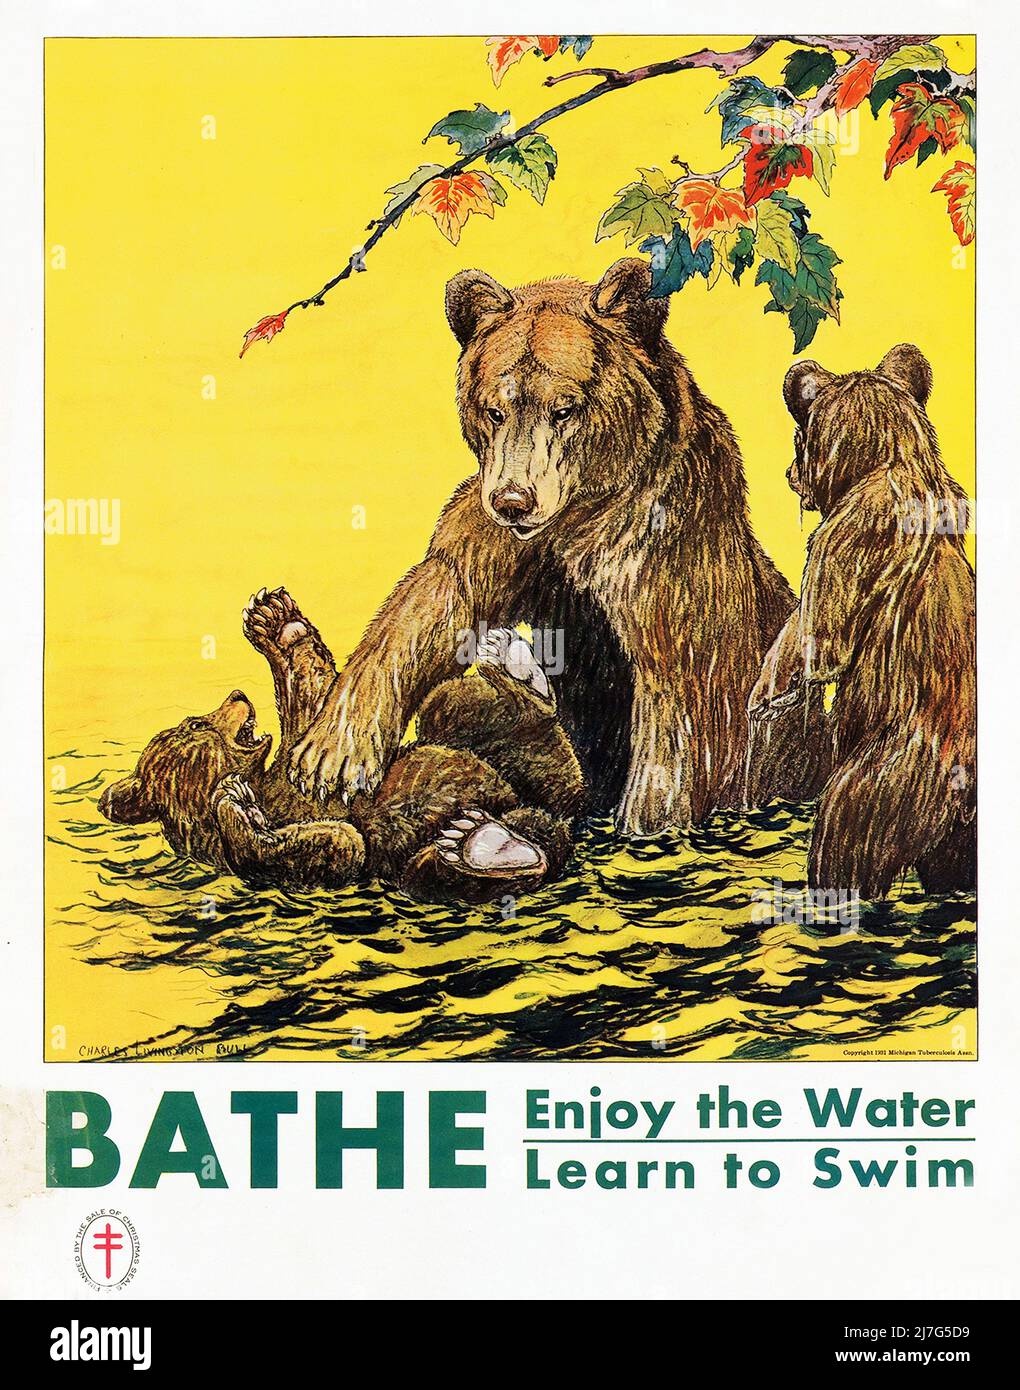 Vintage Learn To Swim Poster - BATHE, Enjoy The Water, Learn To Swim - Mother Bear with Bear cubs Stock Photo